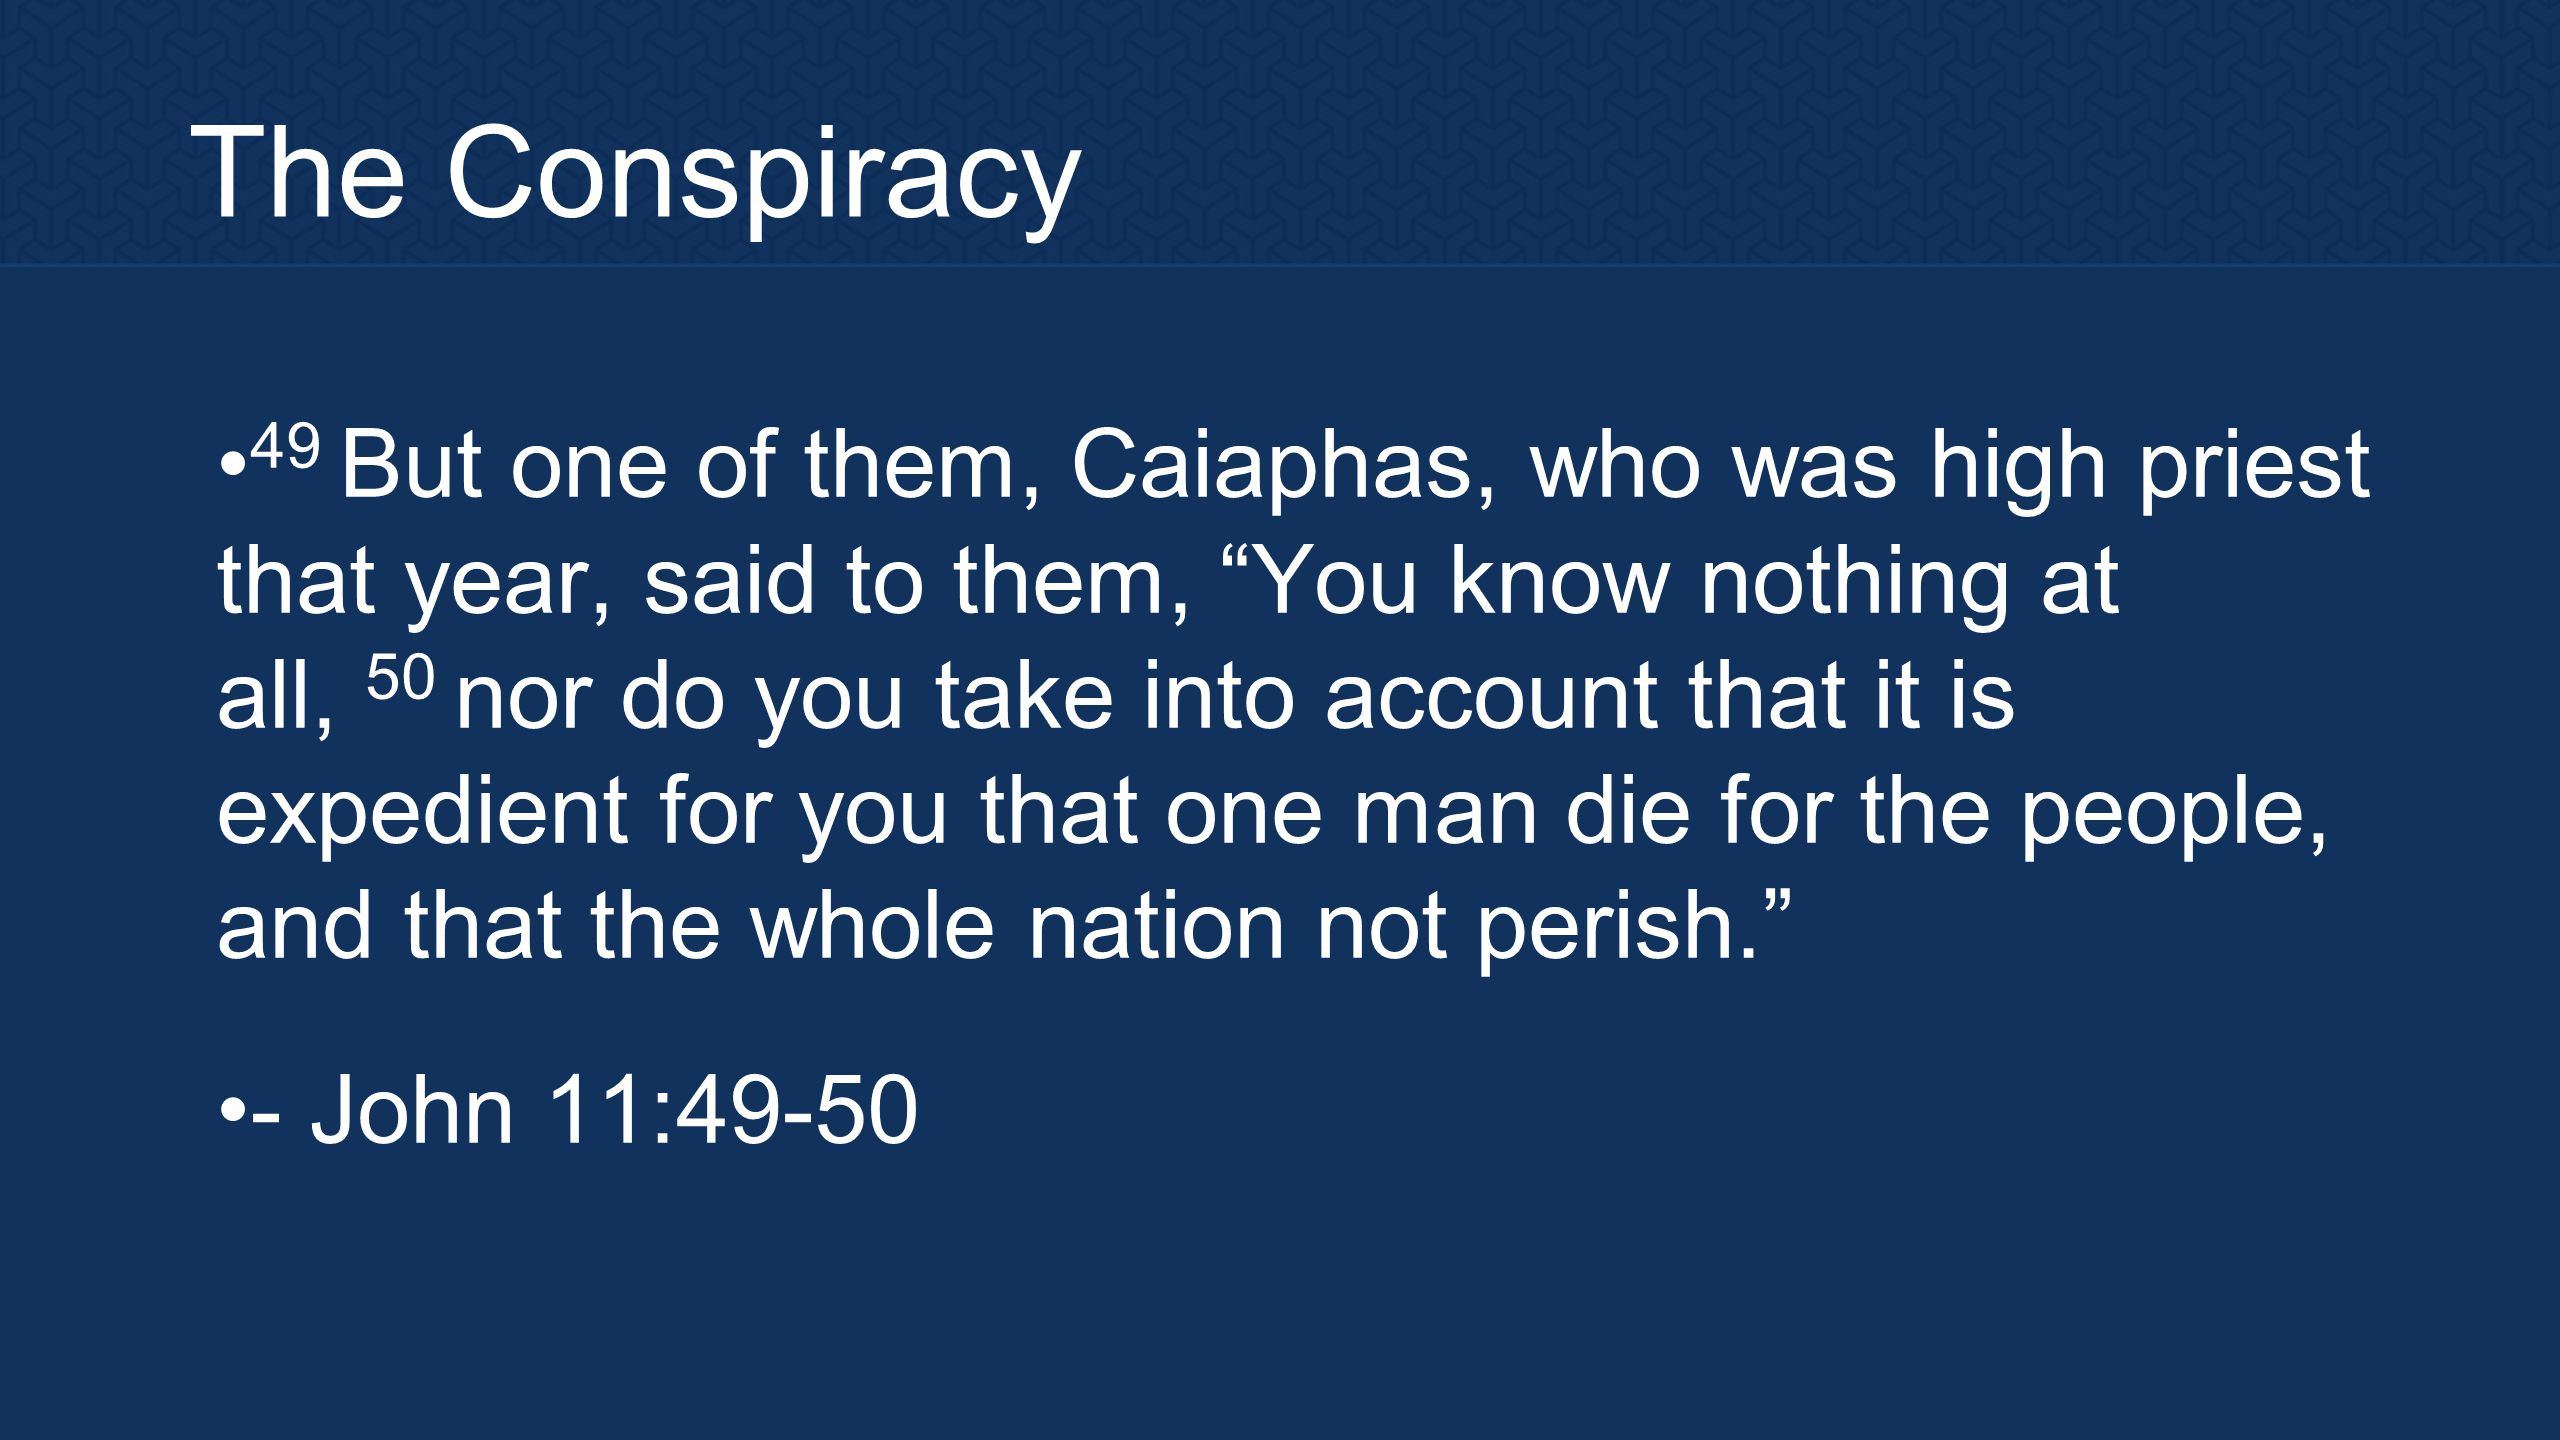 The Conspiracy 49 But one of them, Caiaphas, who was high priest that year, said to them, You know nothing at all, 50 nor do you take into account that it is expedient for you that one man die for the people, and that the whole nation not perish. - John 11:49-50